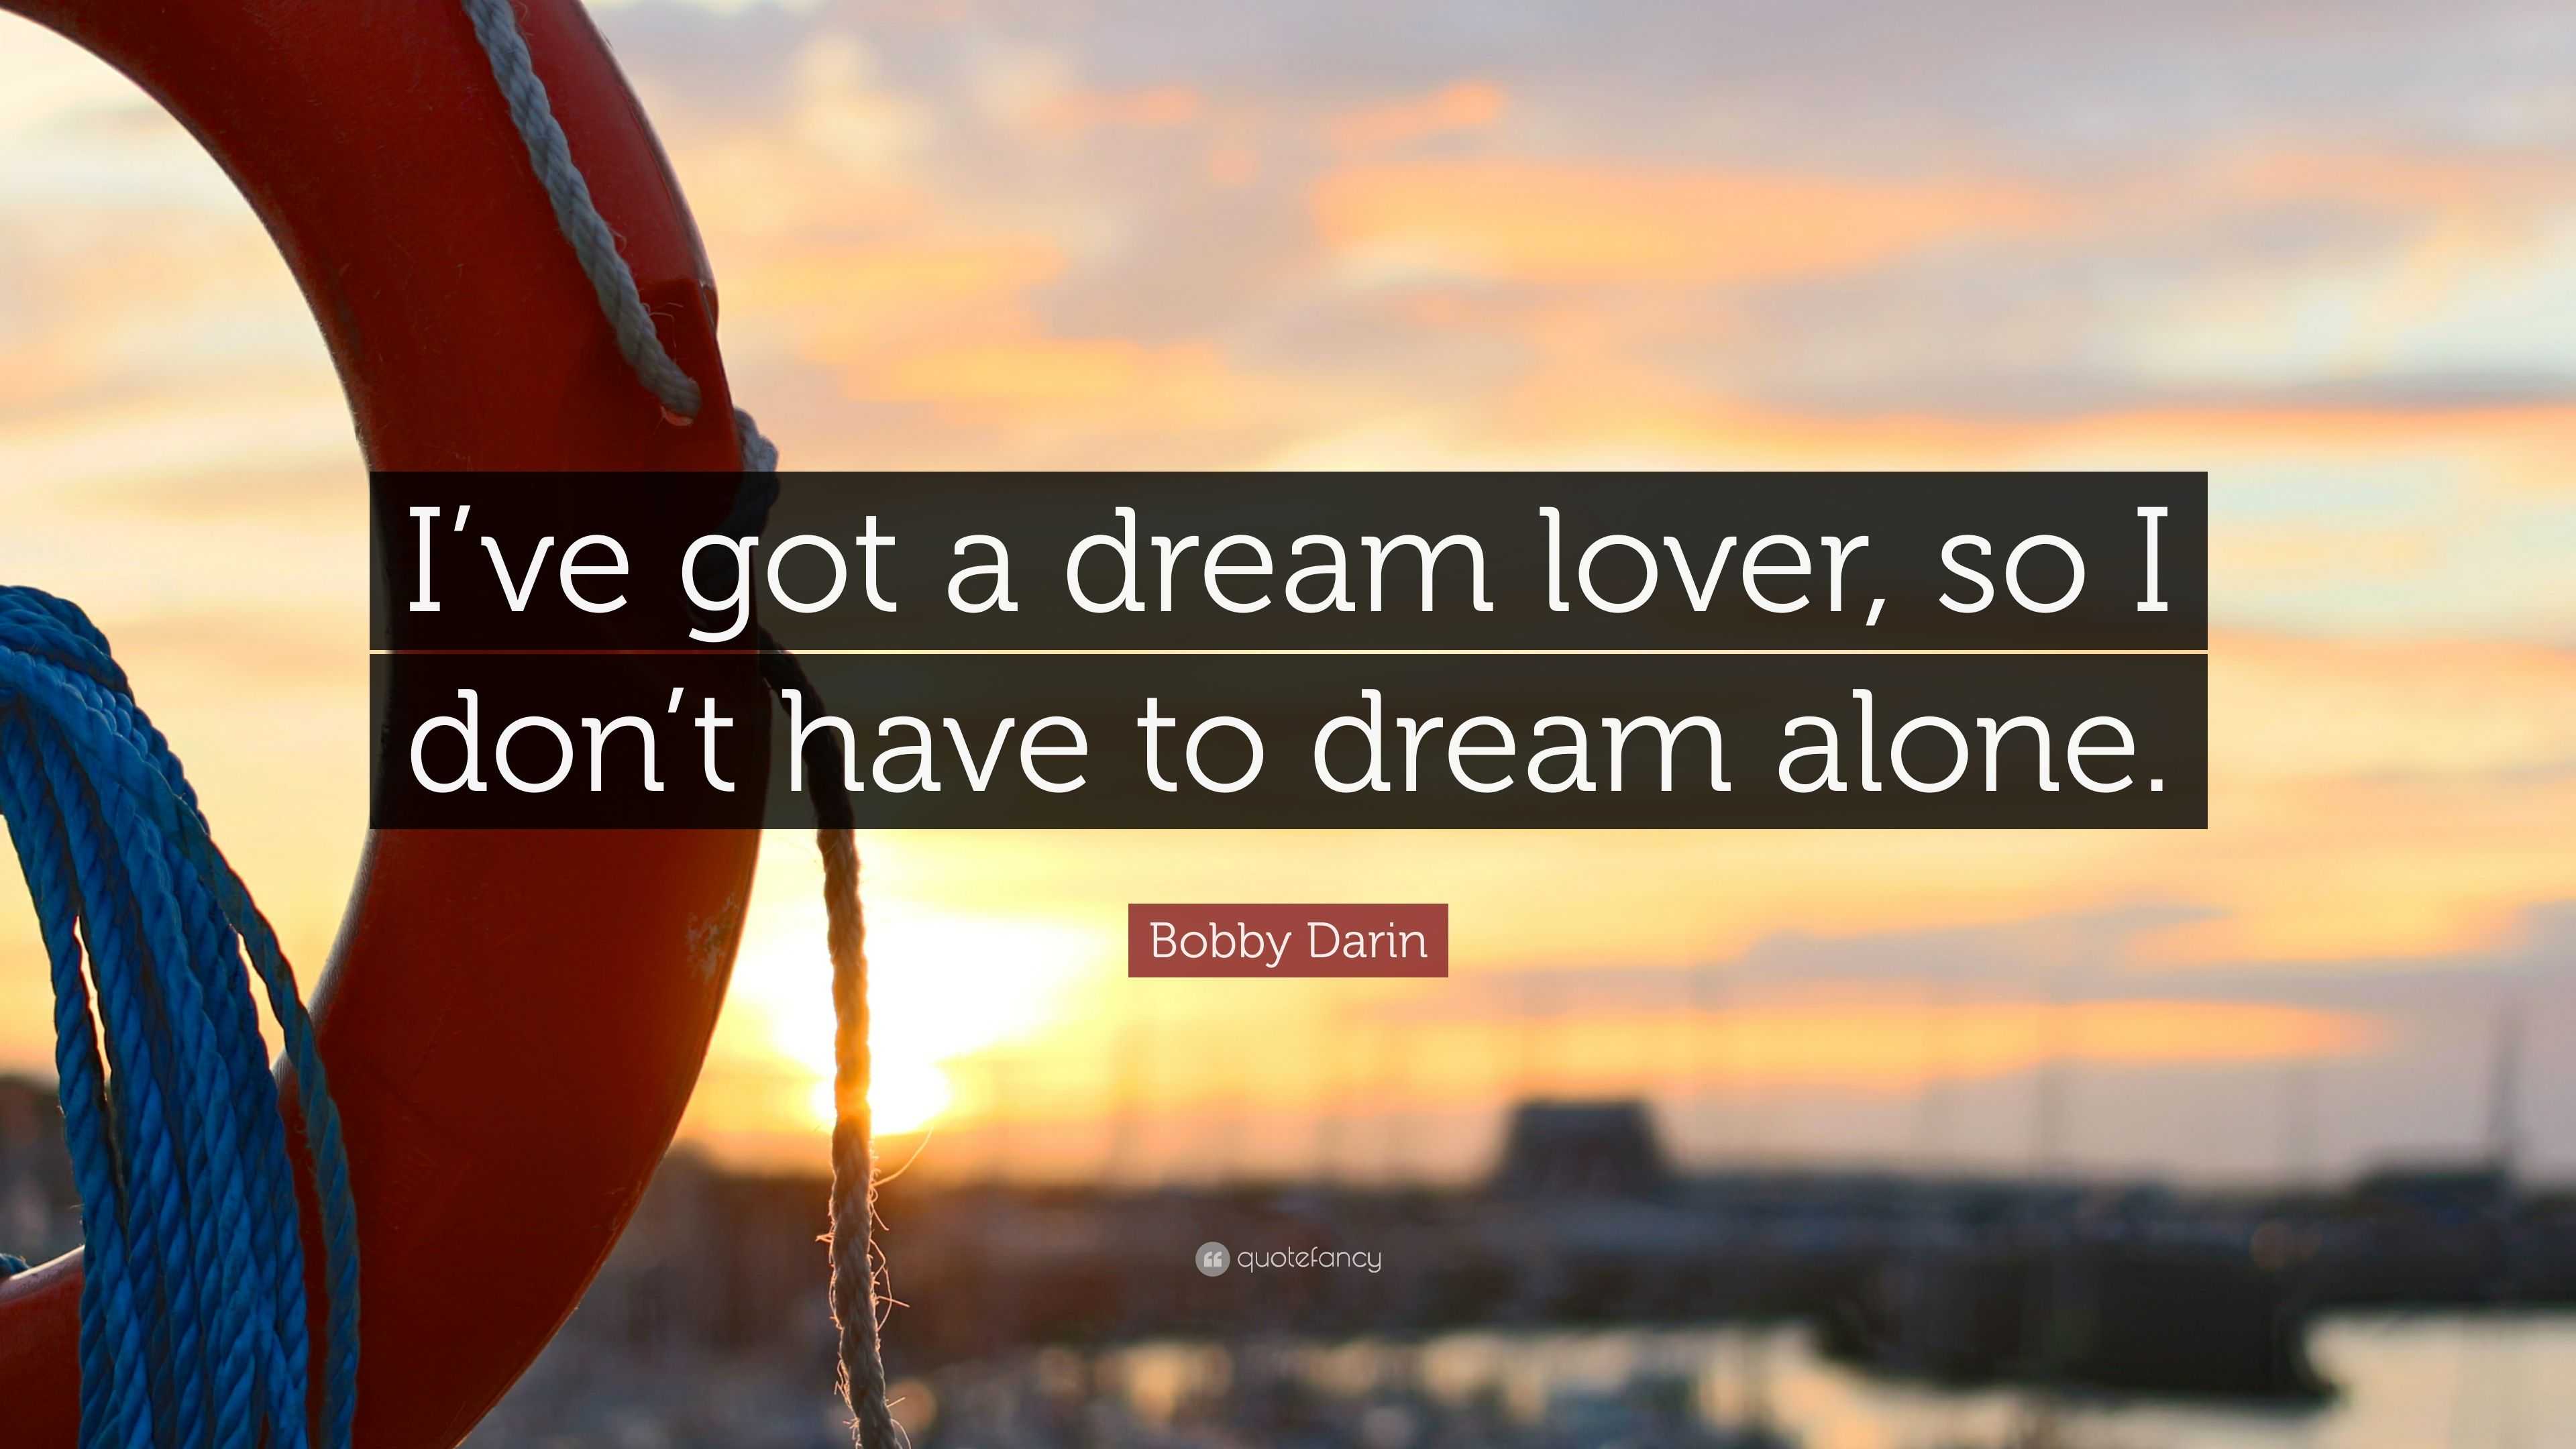 Bobby Darin Quote: “I’ve got a dream lover, so I don’t have to dream ...